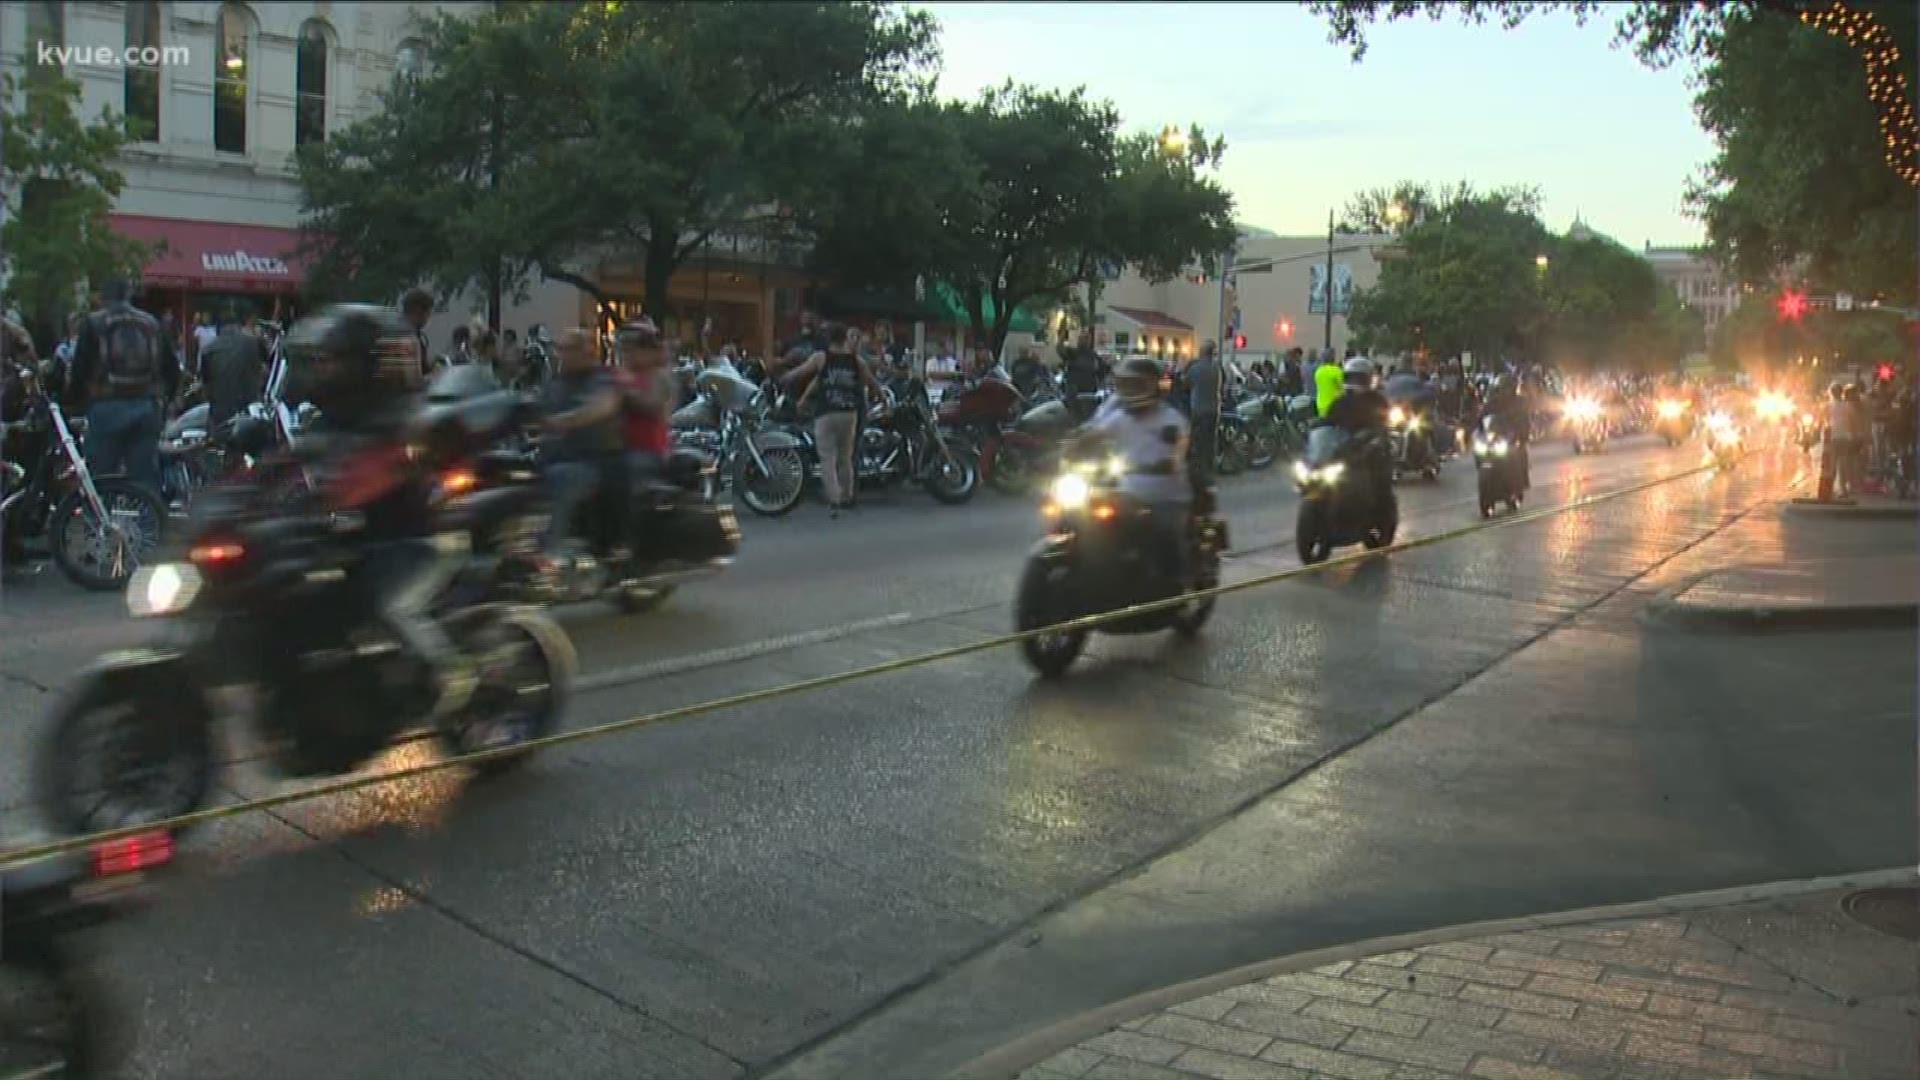 The sights and sounds of hundreds of motorcycles parading down Congress have become an Austin tradition.